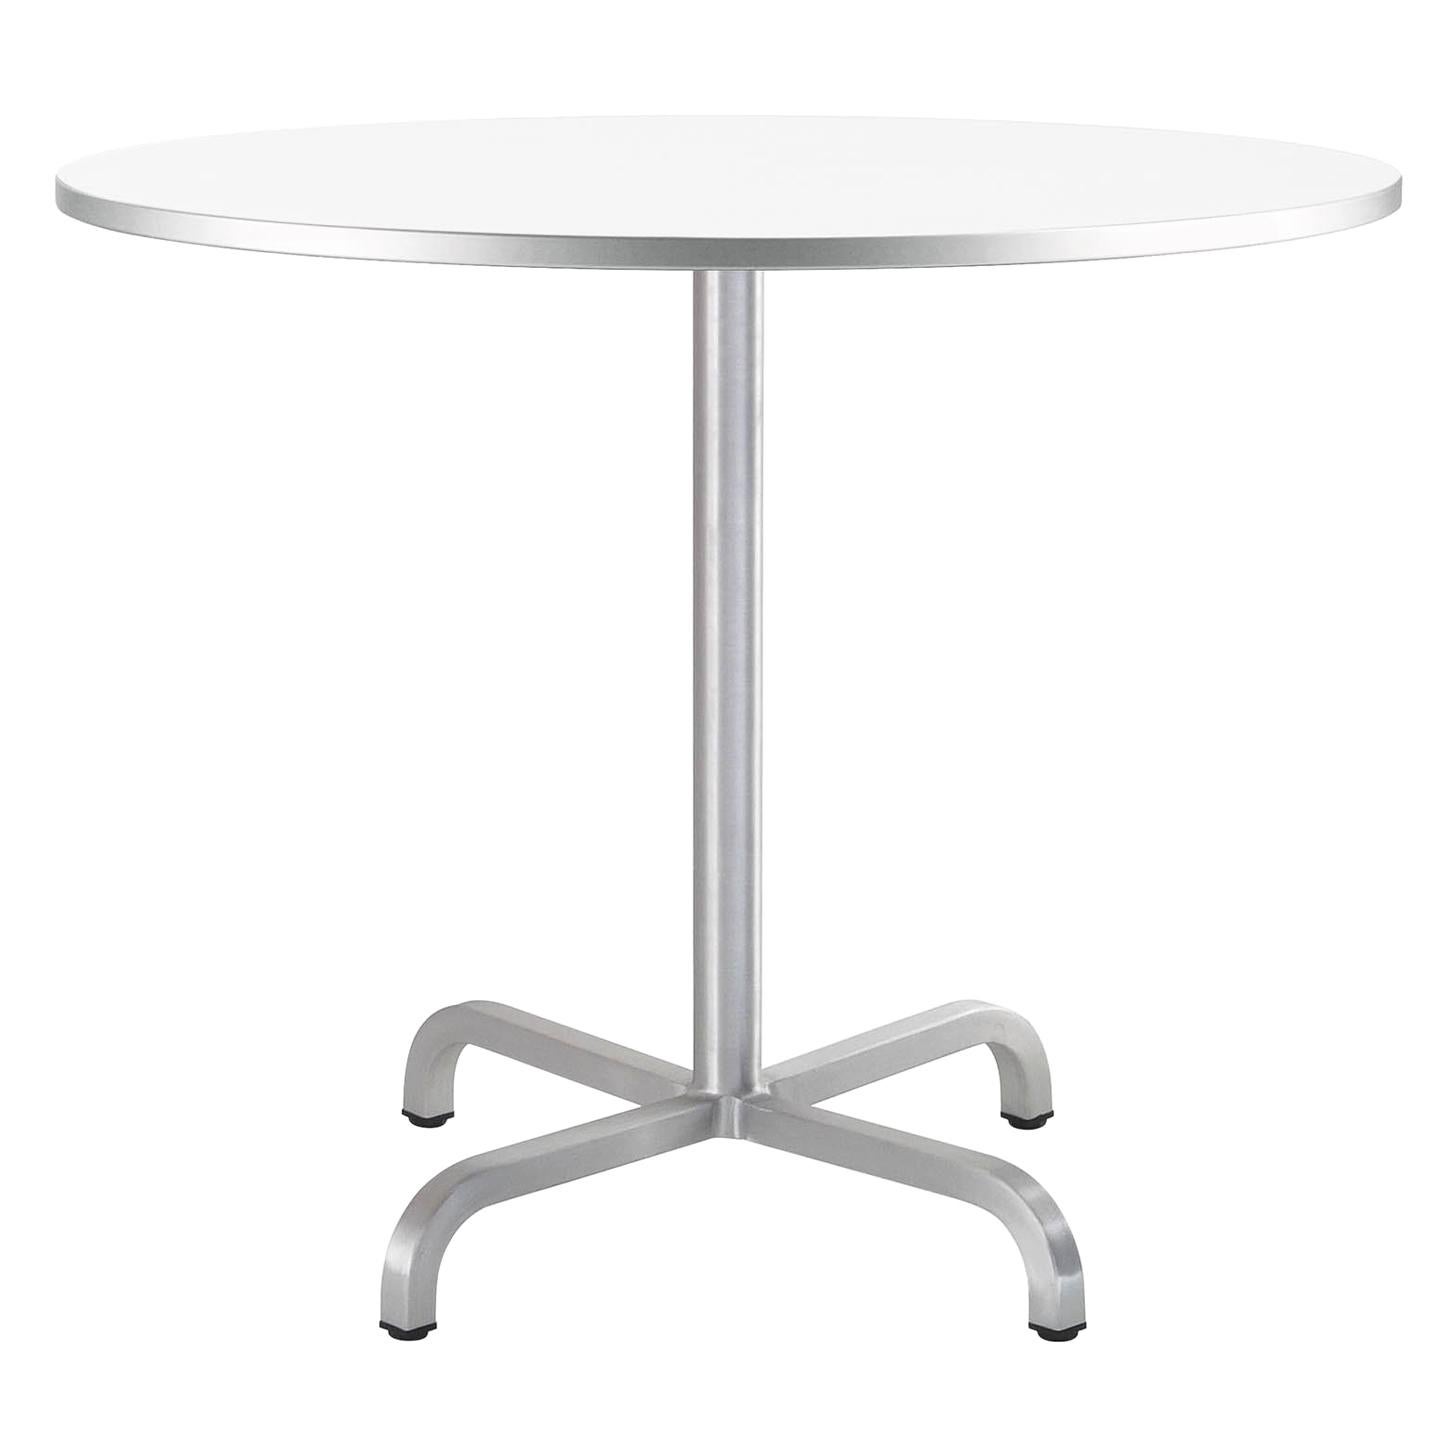 Emeco 20-06 Large Round Cafe Table with White Laminate Top by Norman Foster For Sale